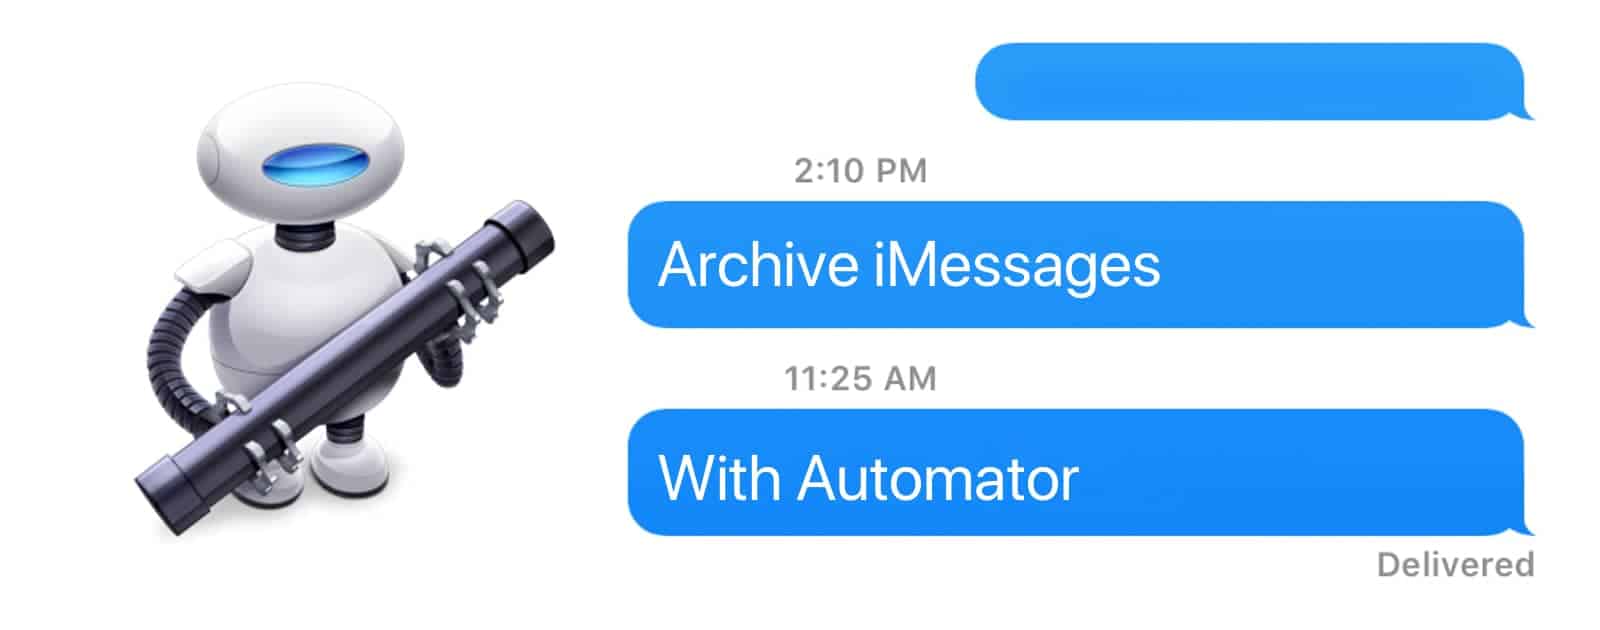 macOS: How to Archive iMessages with Automator